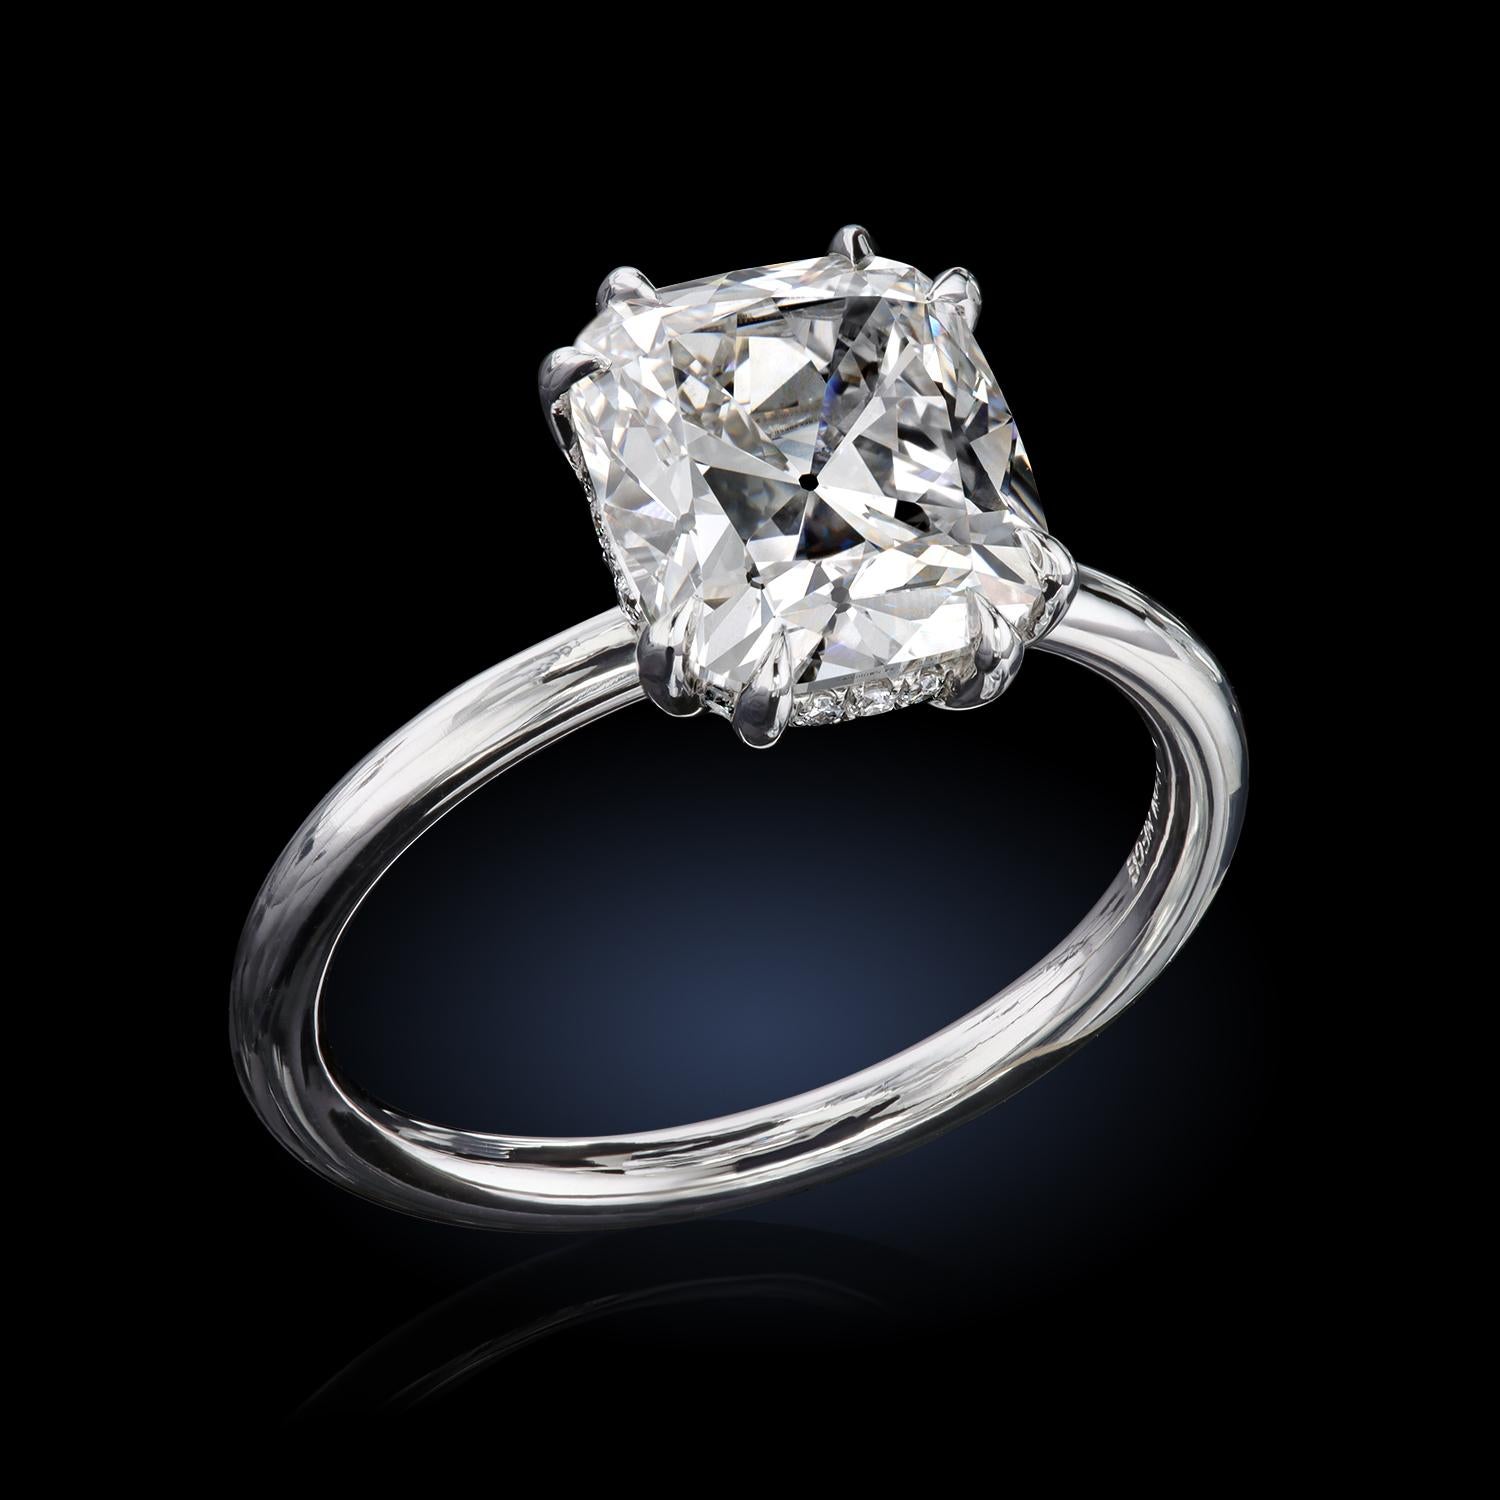 Women's Leon Mege platinum hand-forged solitaire features a certified OMC diamond. For Sale